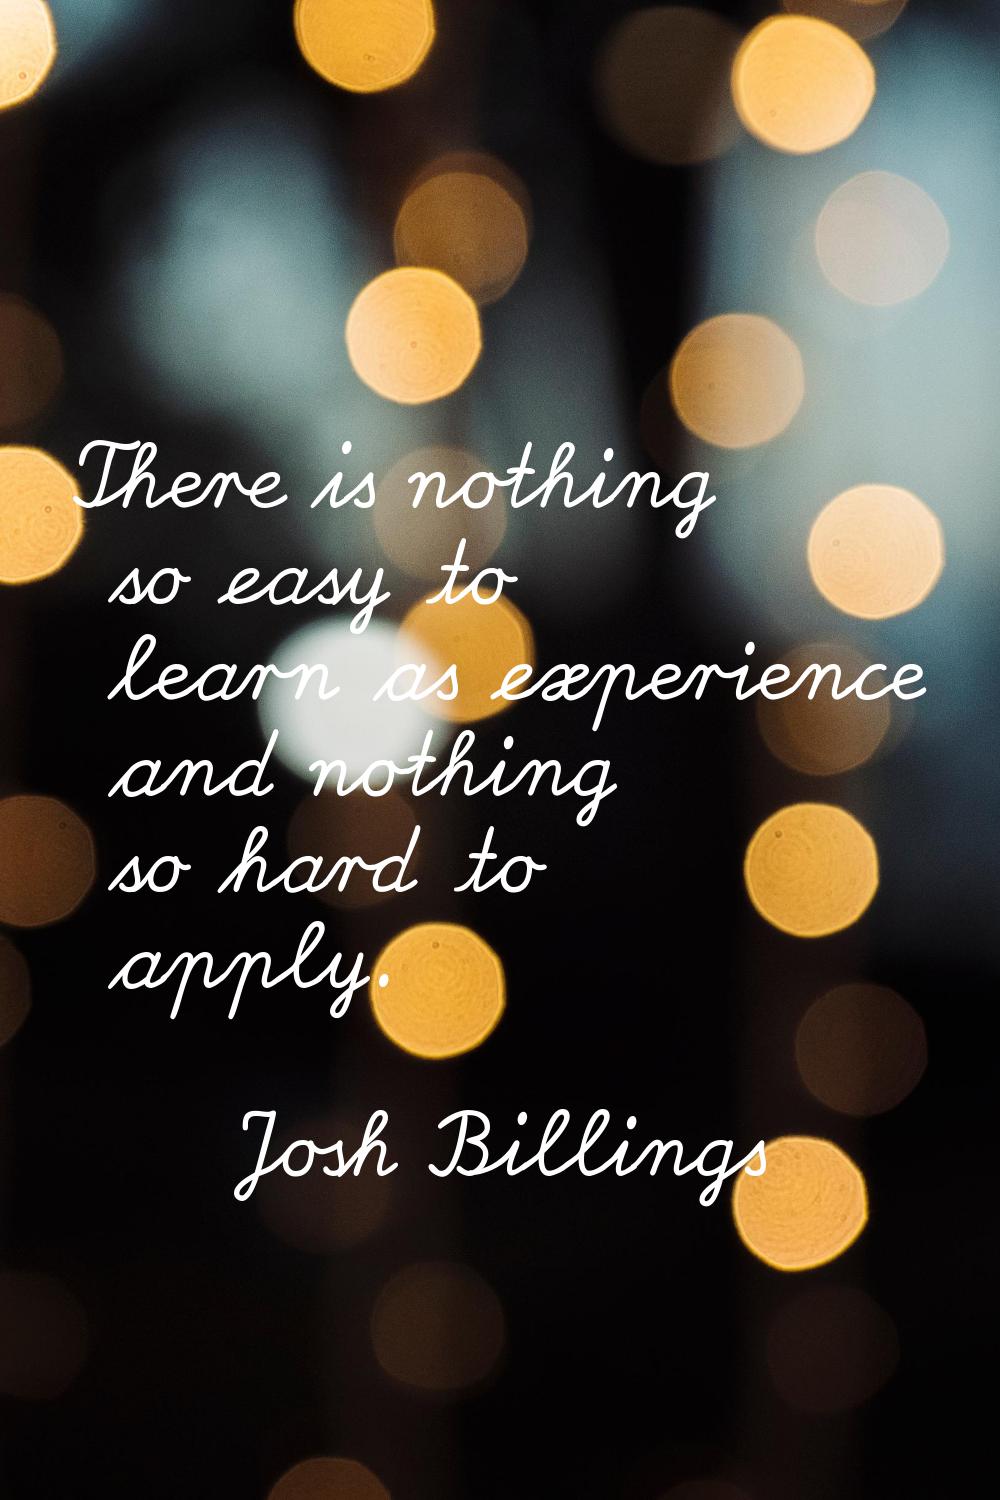 There is nothing so easy to learn as experience and nothing so hard to apply.